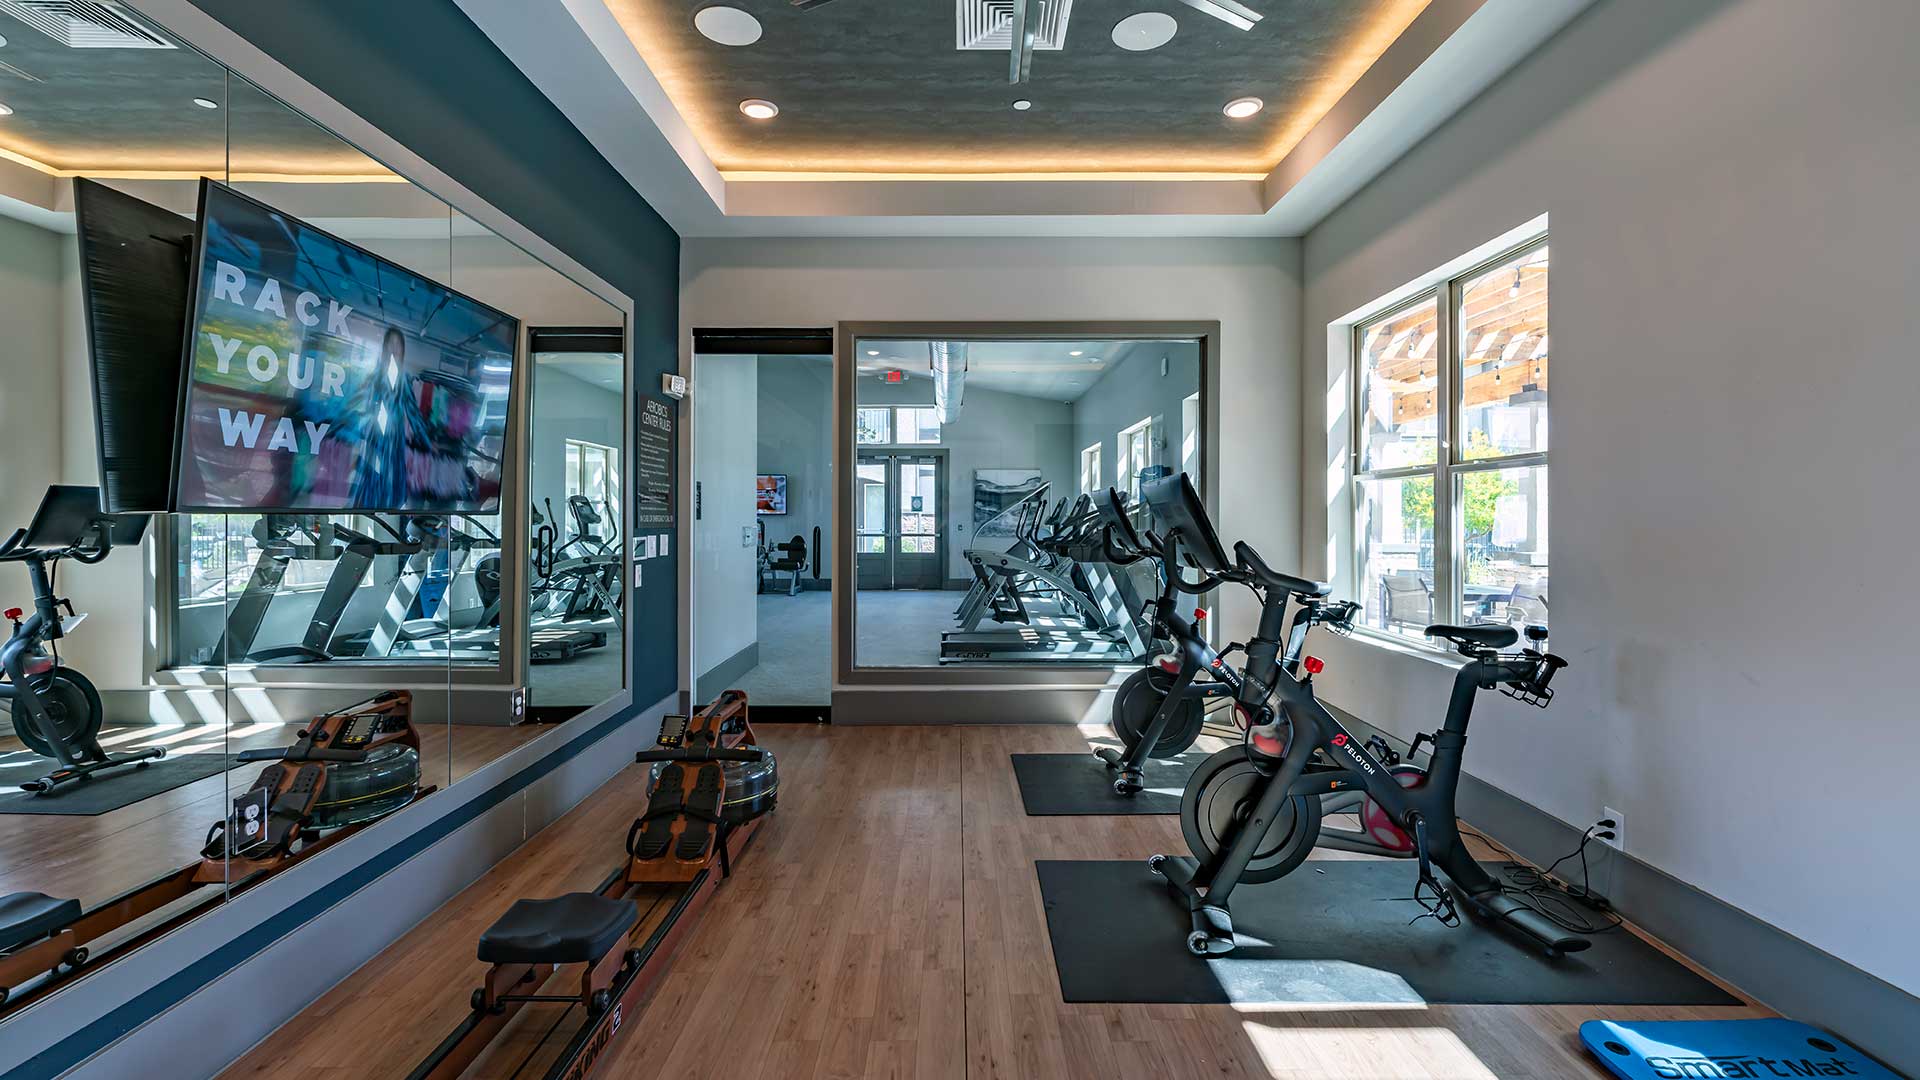 Interior of a modern gym with stationary bikes, treadmills, and a mirrored wall, featuring a large screen displaying motivational text.